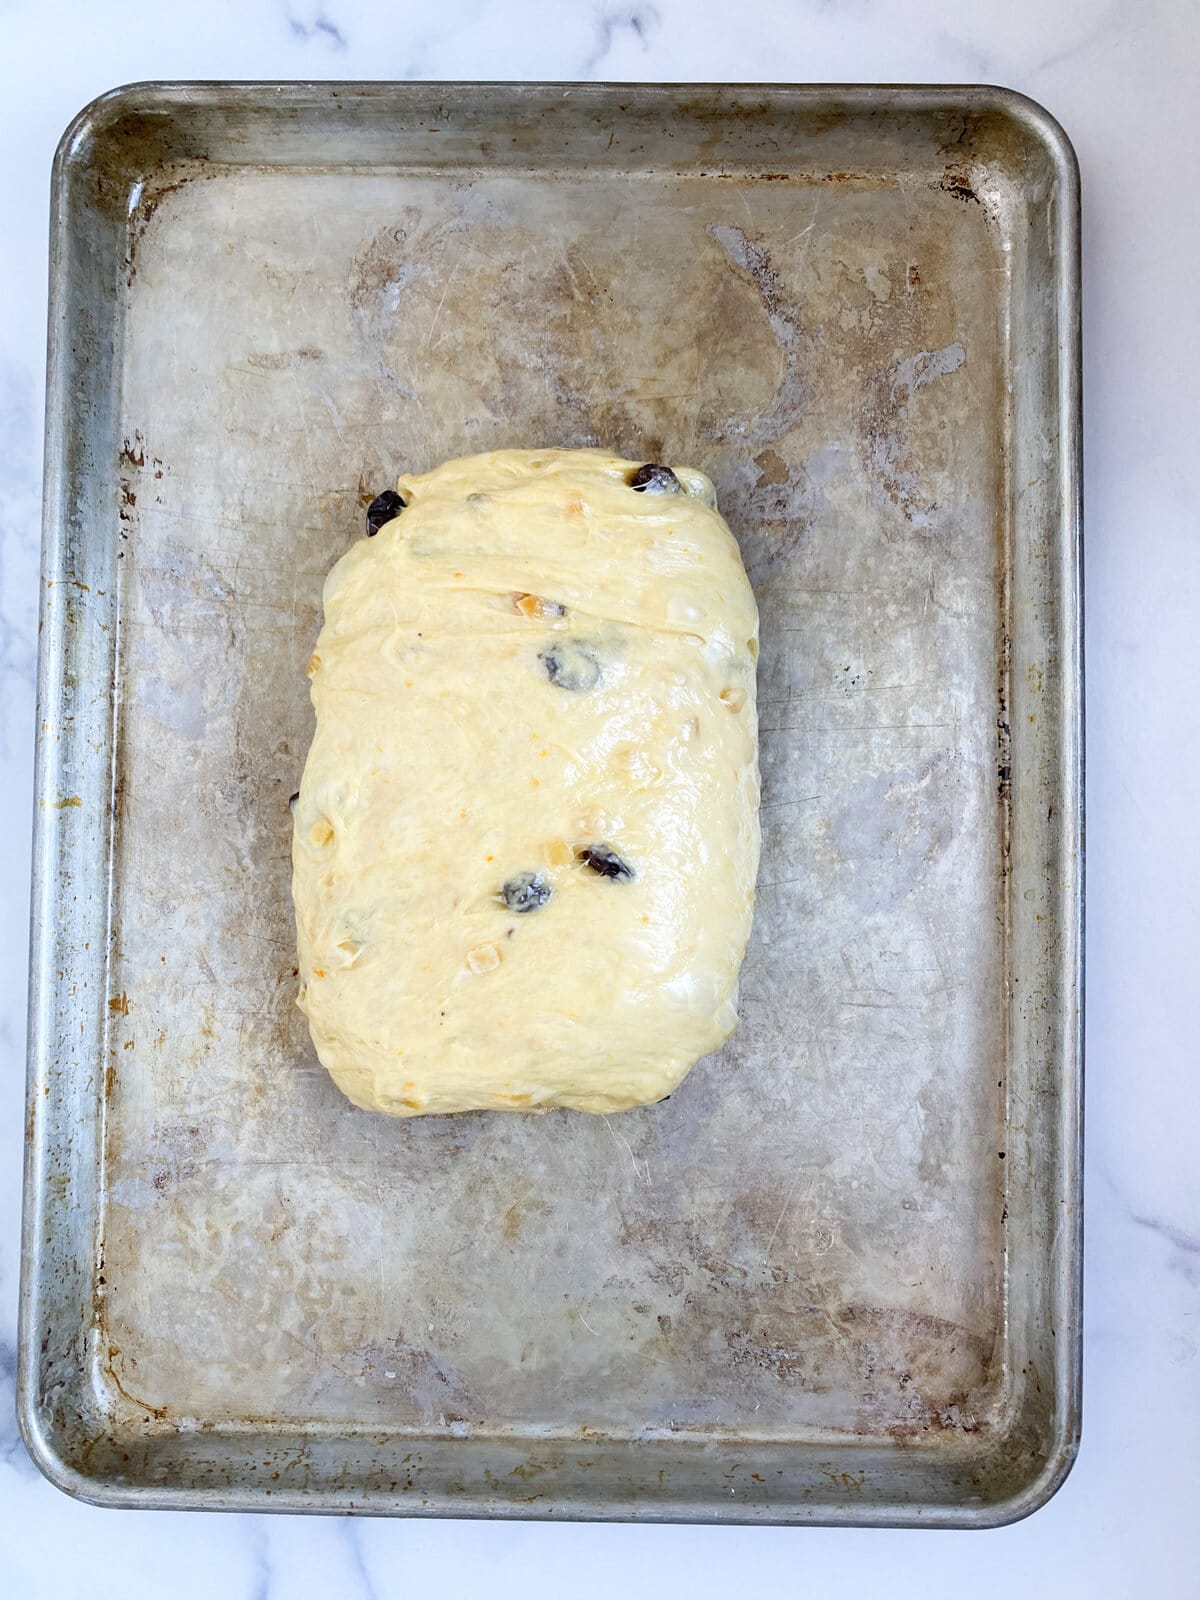 Process for making panettone: folding the dough.